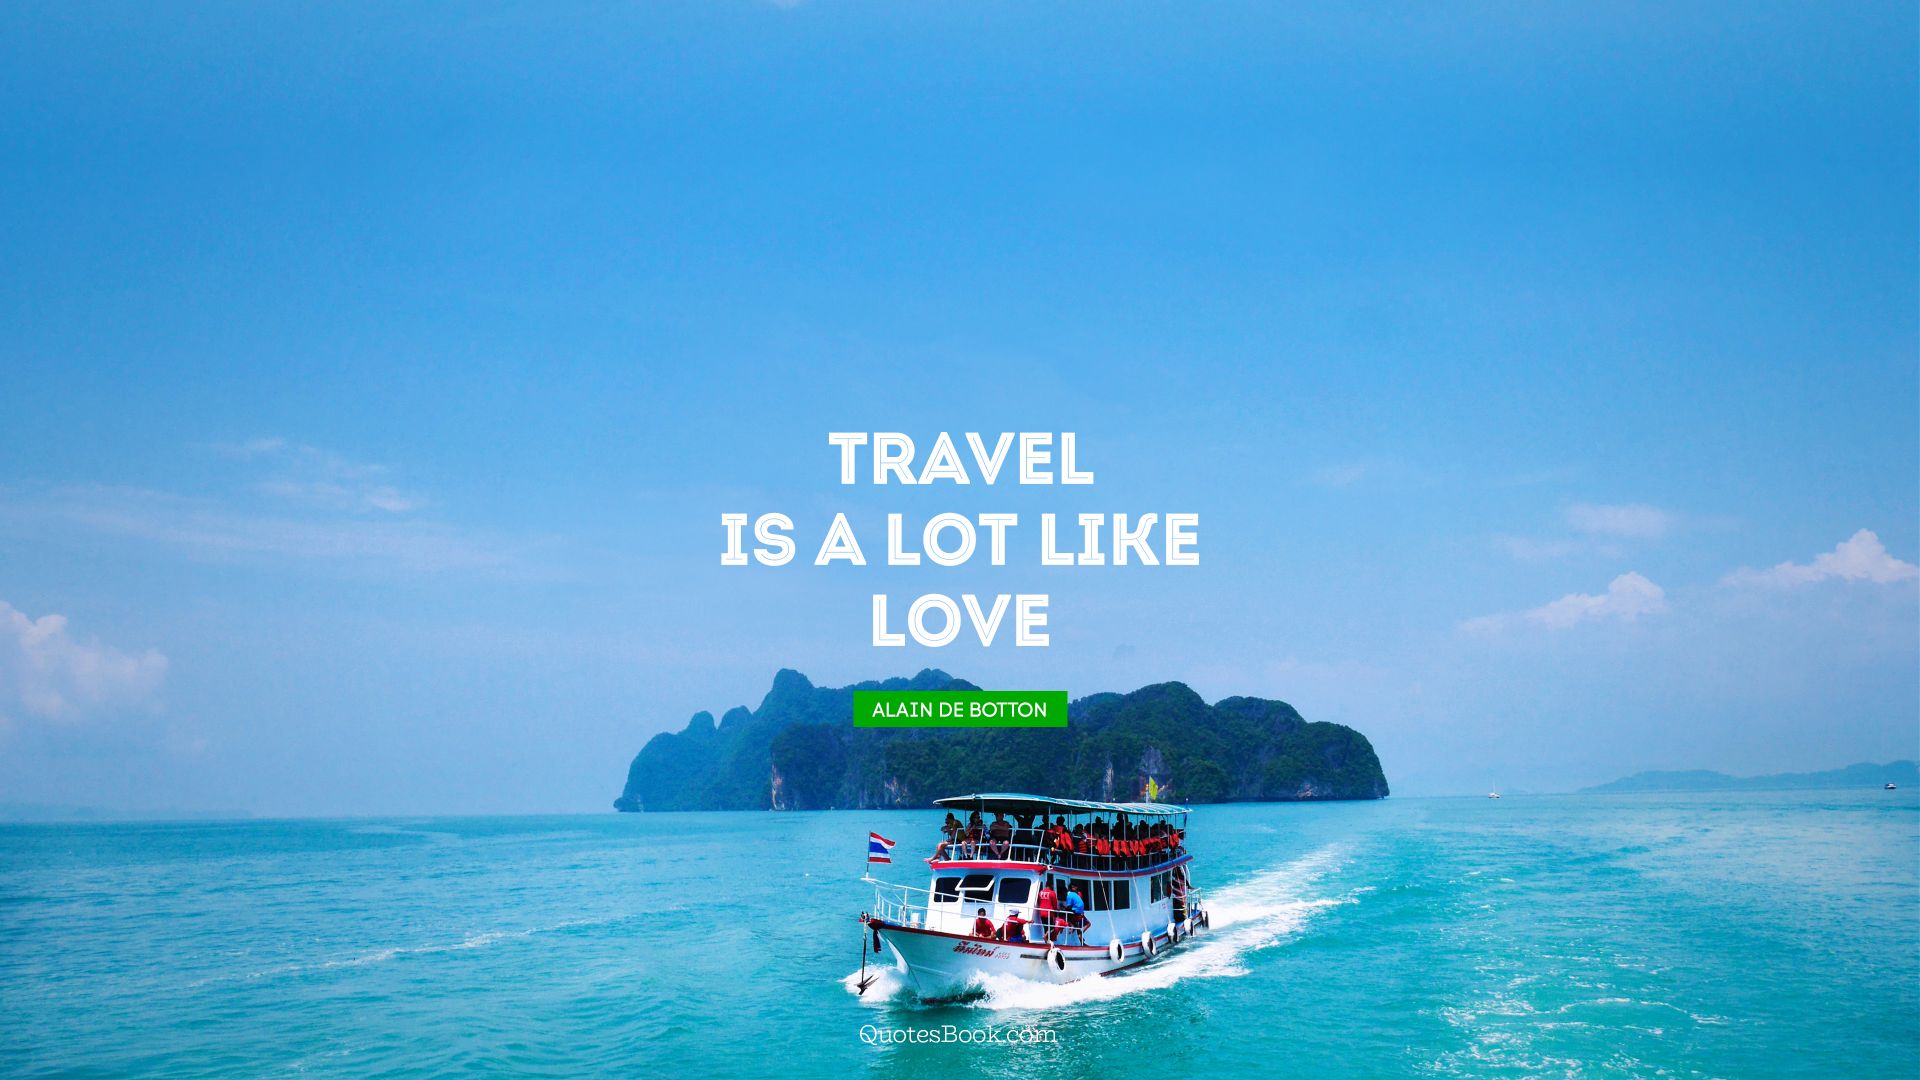 Travel is a lot like love. - Quote by Alain de Botton